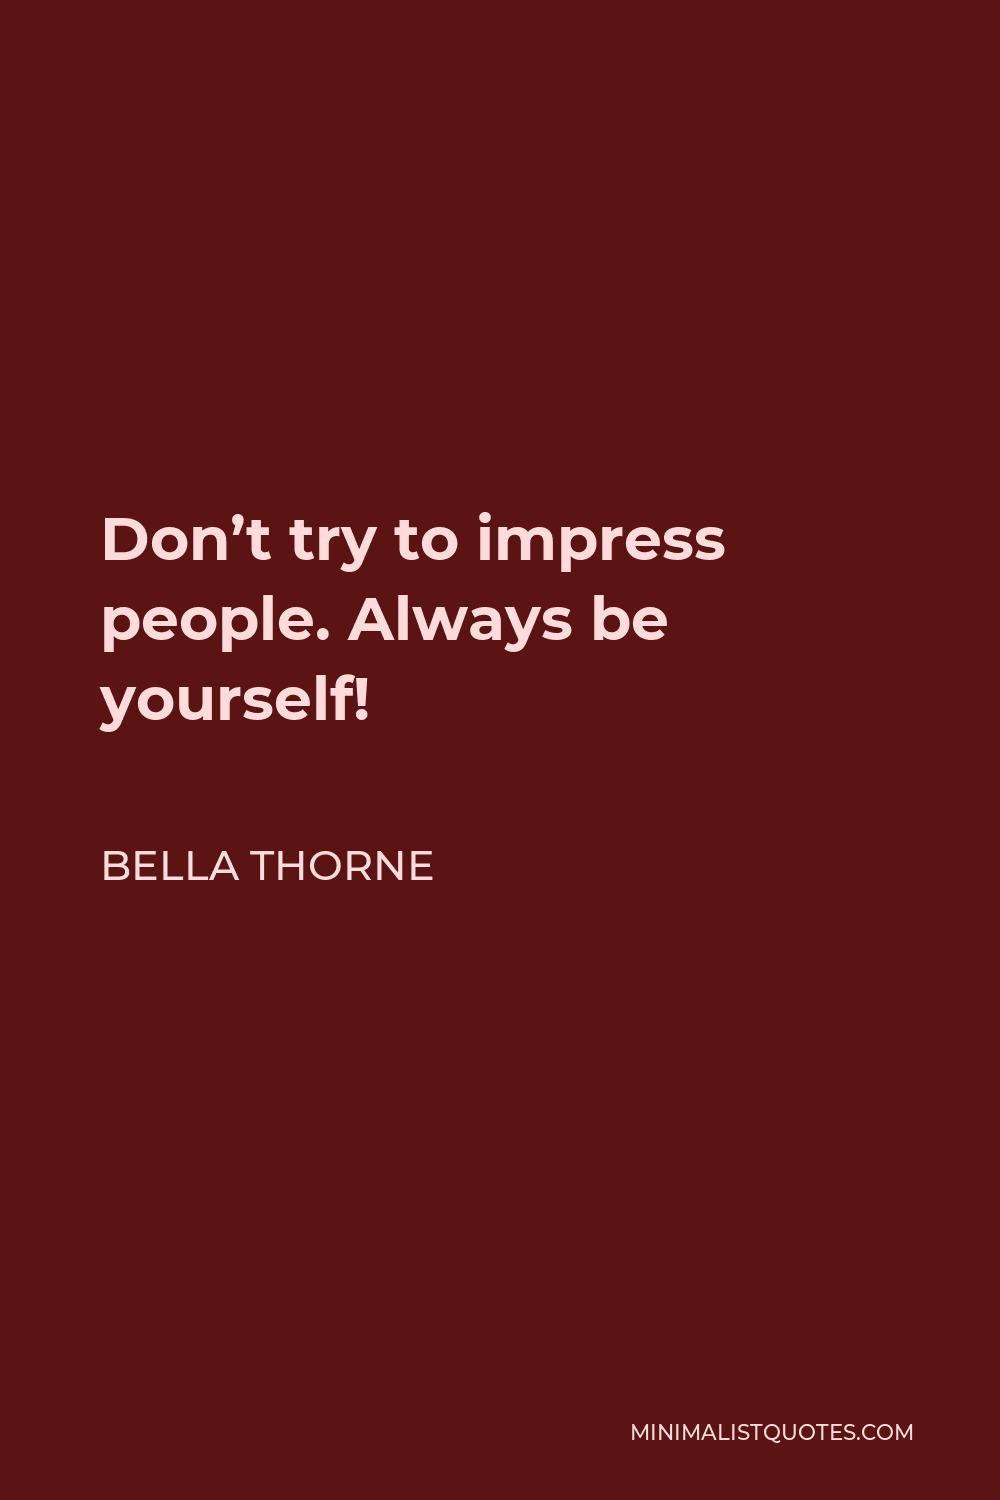 Bella Thorne Quote - Don’t try to impress people. Always be yourself!